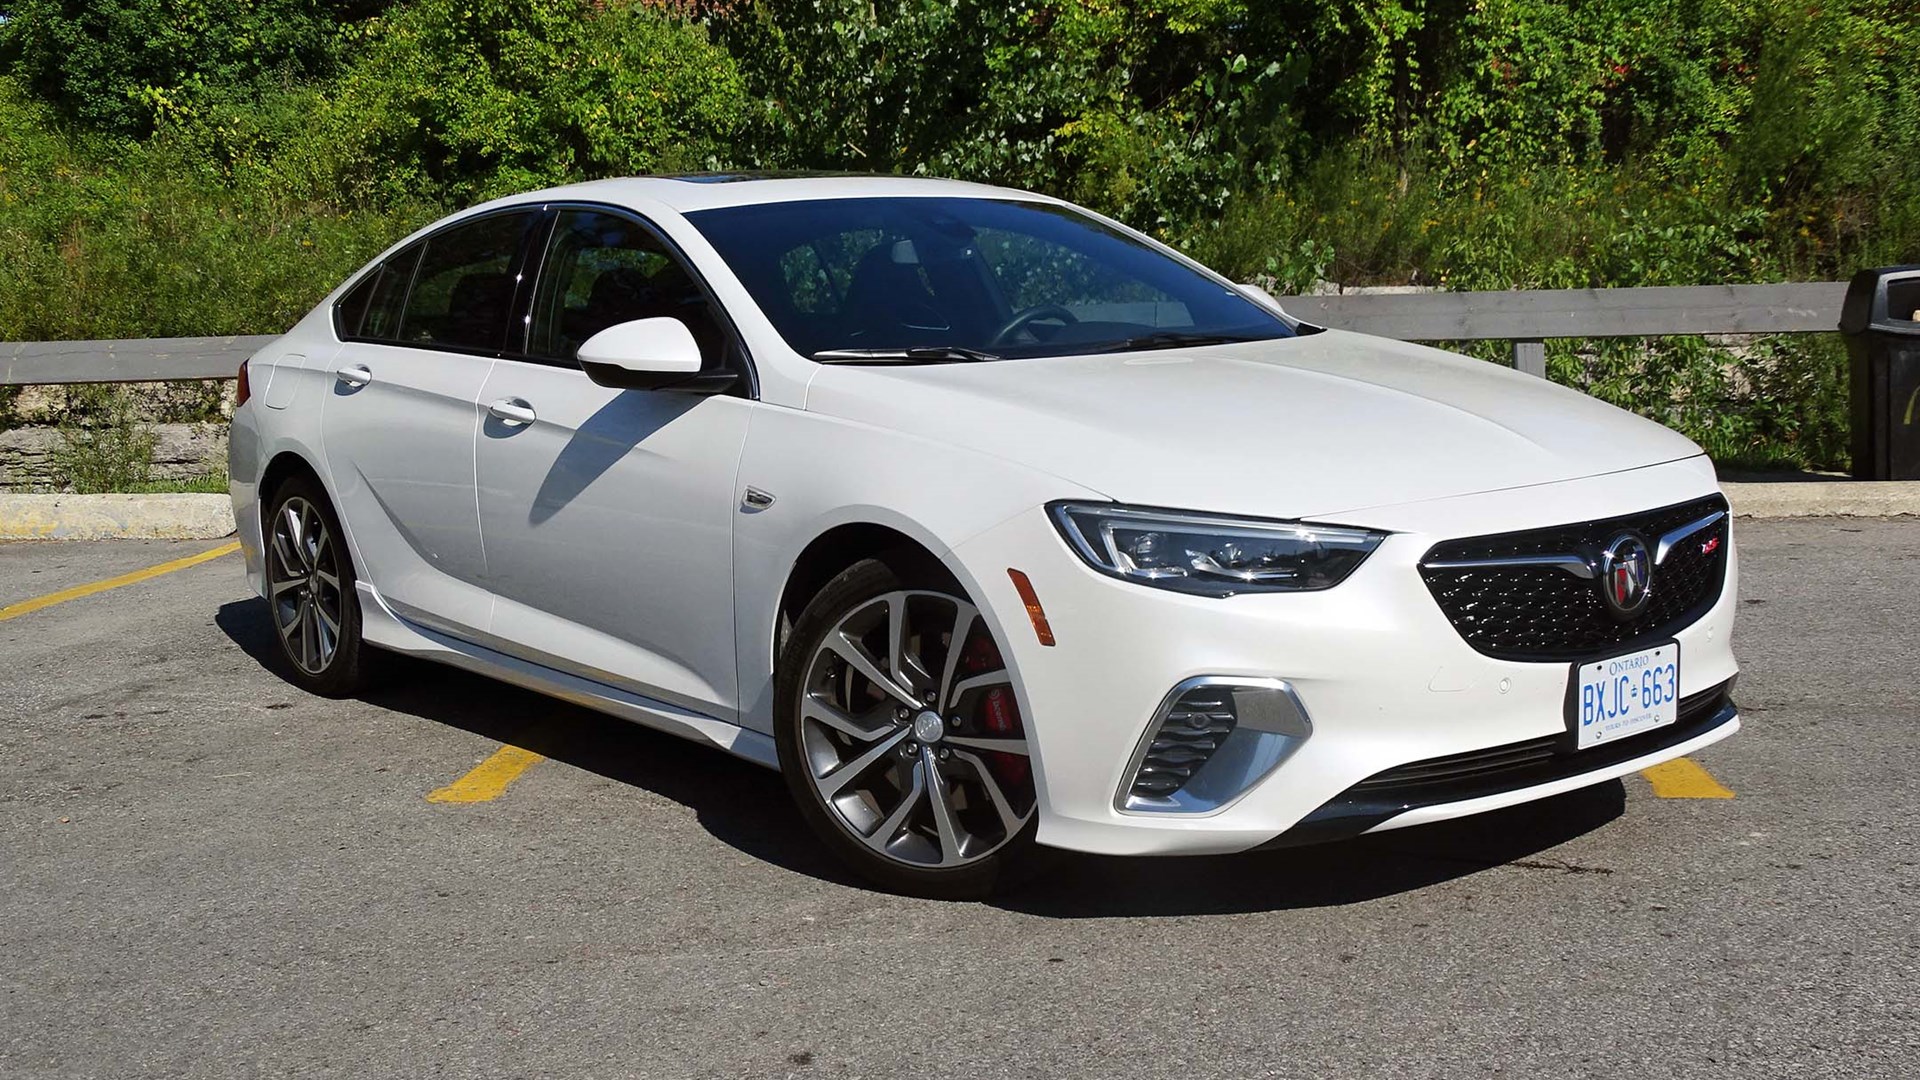 2018 Buick Regal GS Test Drive Review | AutoTrader.ca